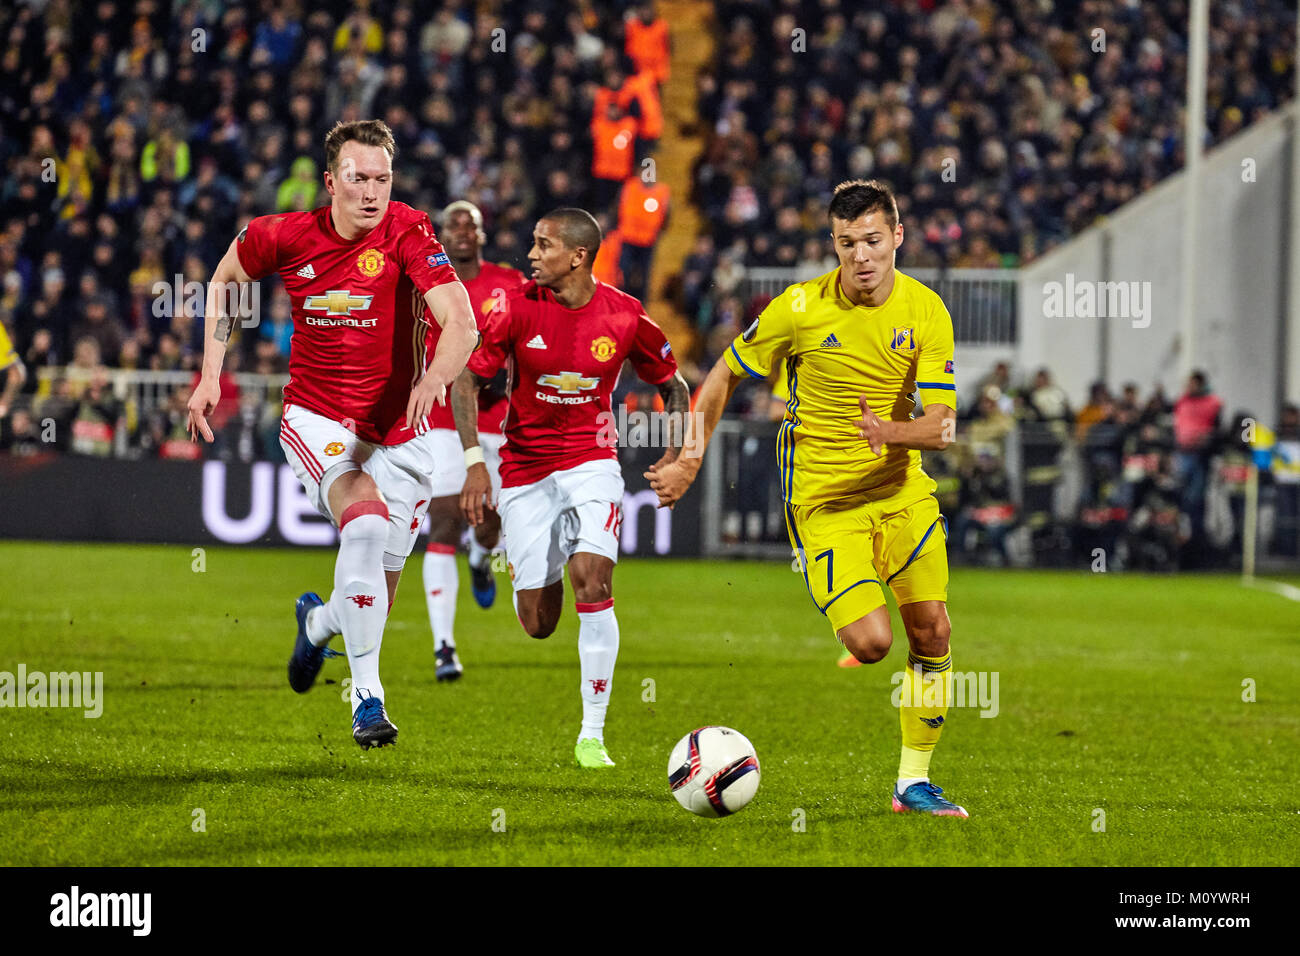 Philip Jones, Game moments in match 1/8 finals of the Europa League between FC 'Rostov' and 'Manchester United', 09 March 2017 in Rostov-on-Don, Russi Stock Photo